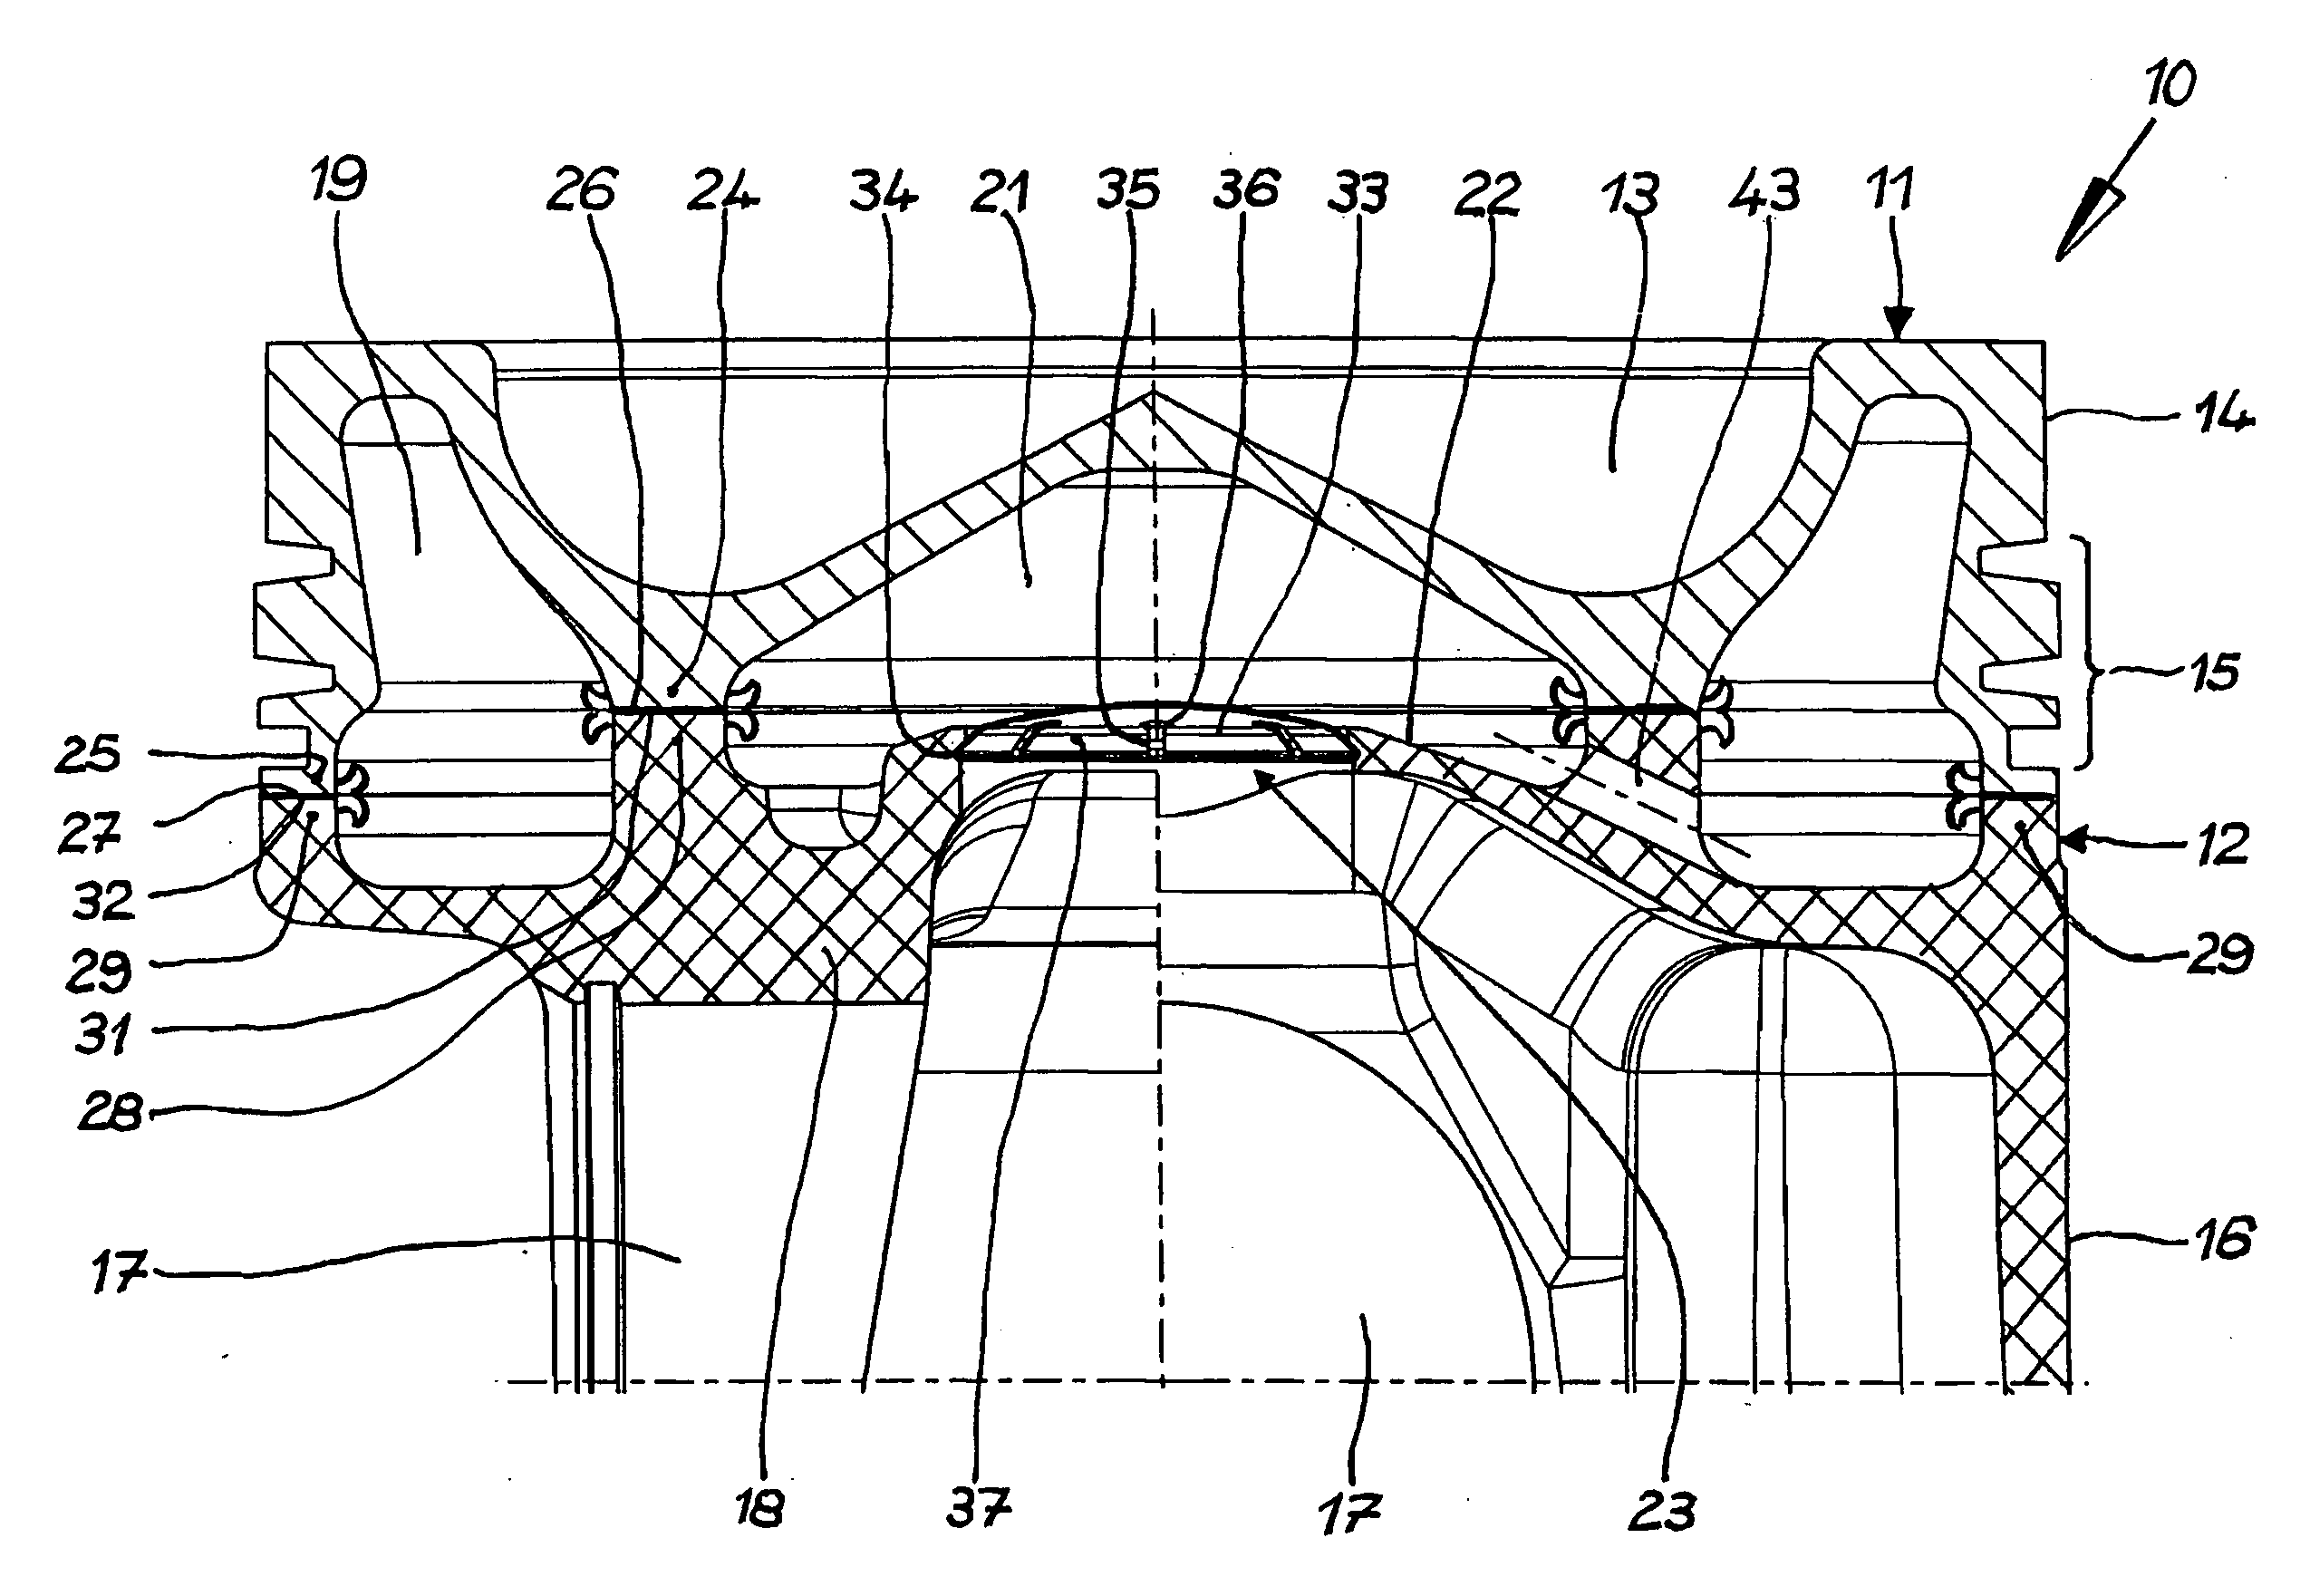 Multi-part piston for an internal combustion engine